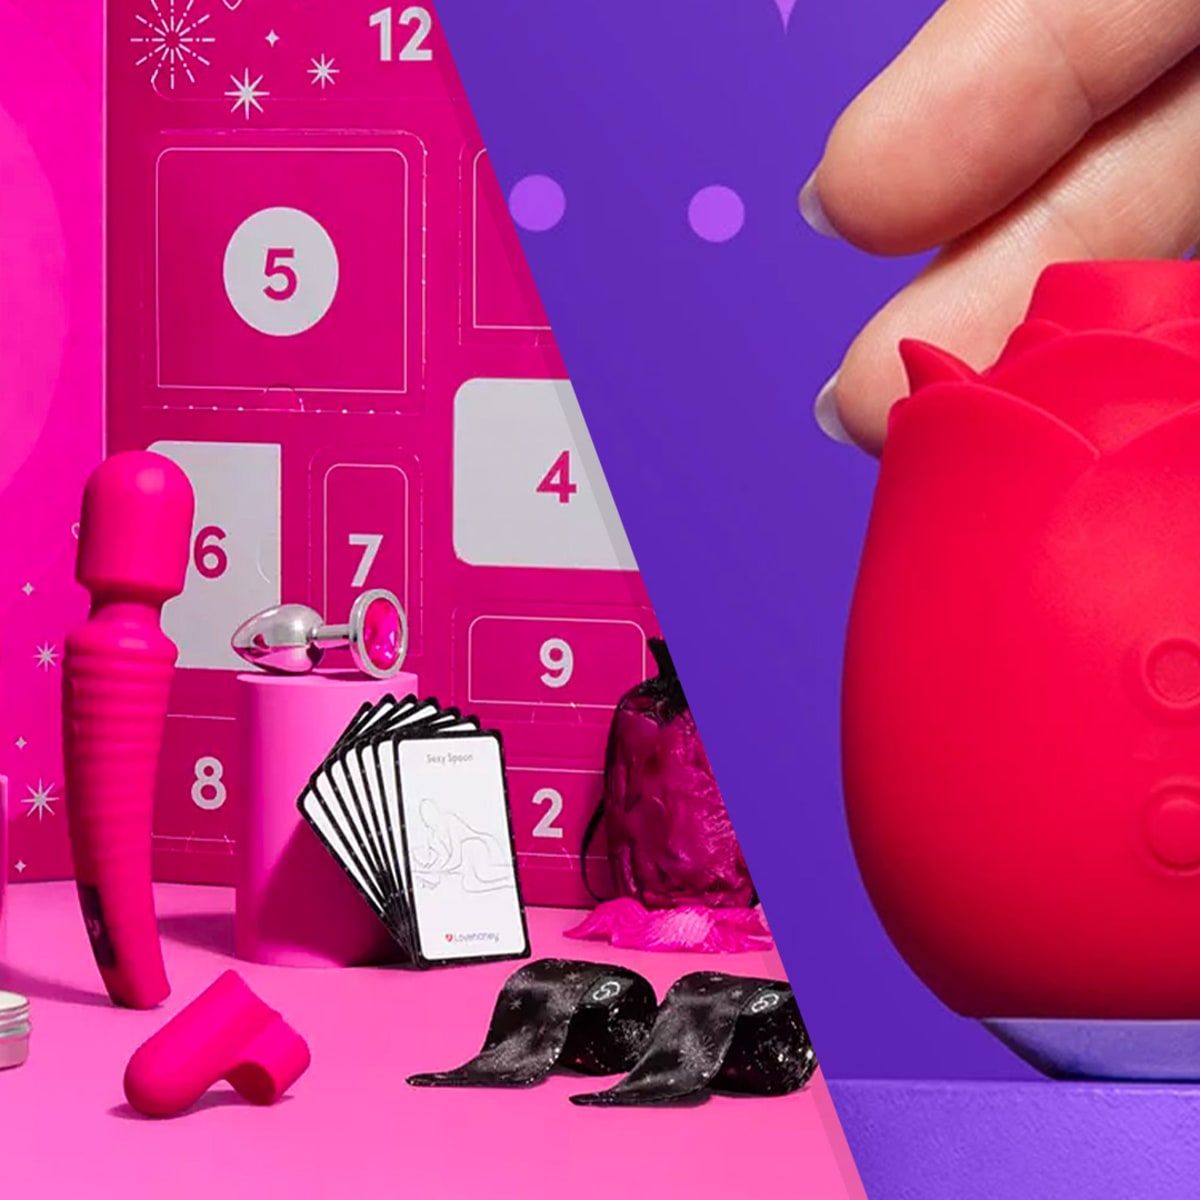 Lovehoney Advent Calendars: A Gift for the Naughty & Nice - Men's